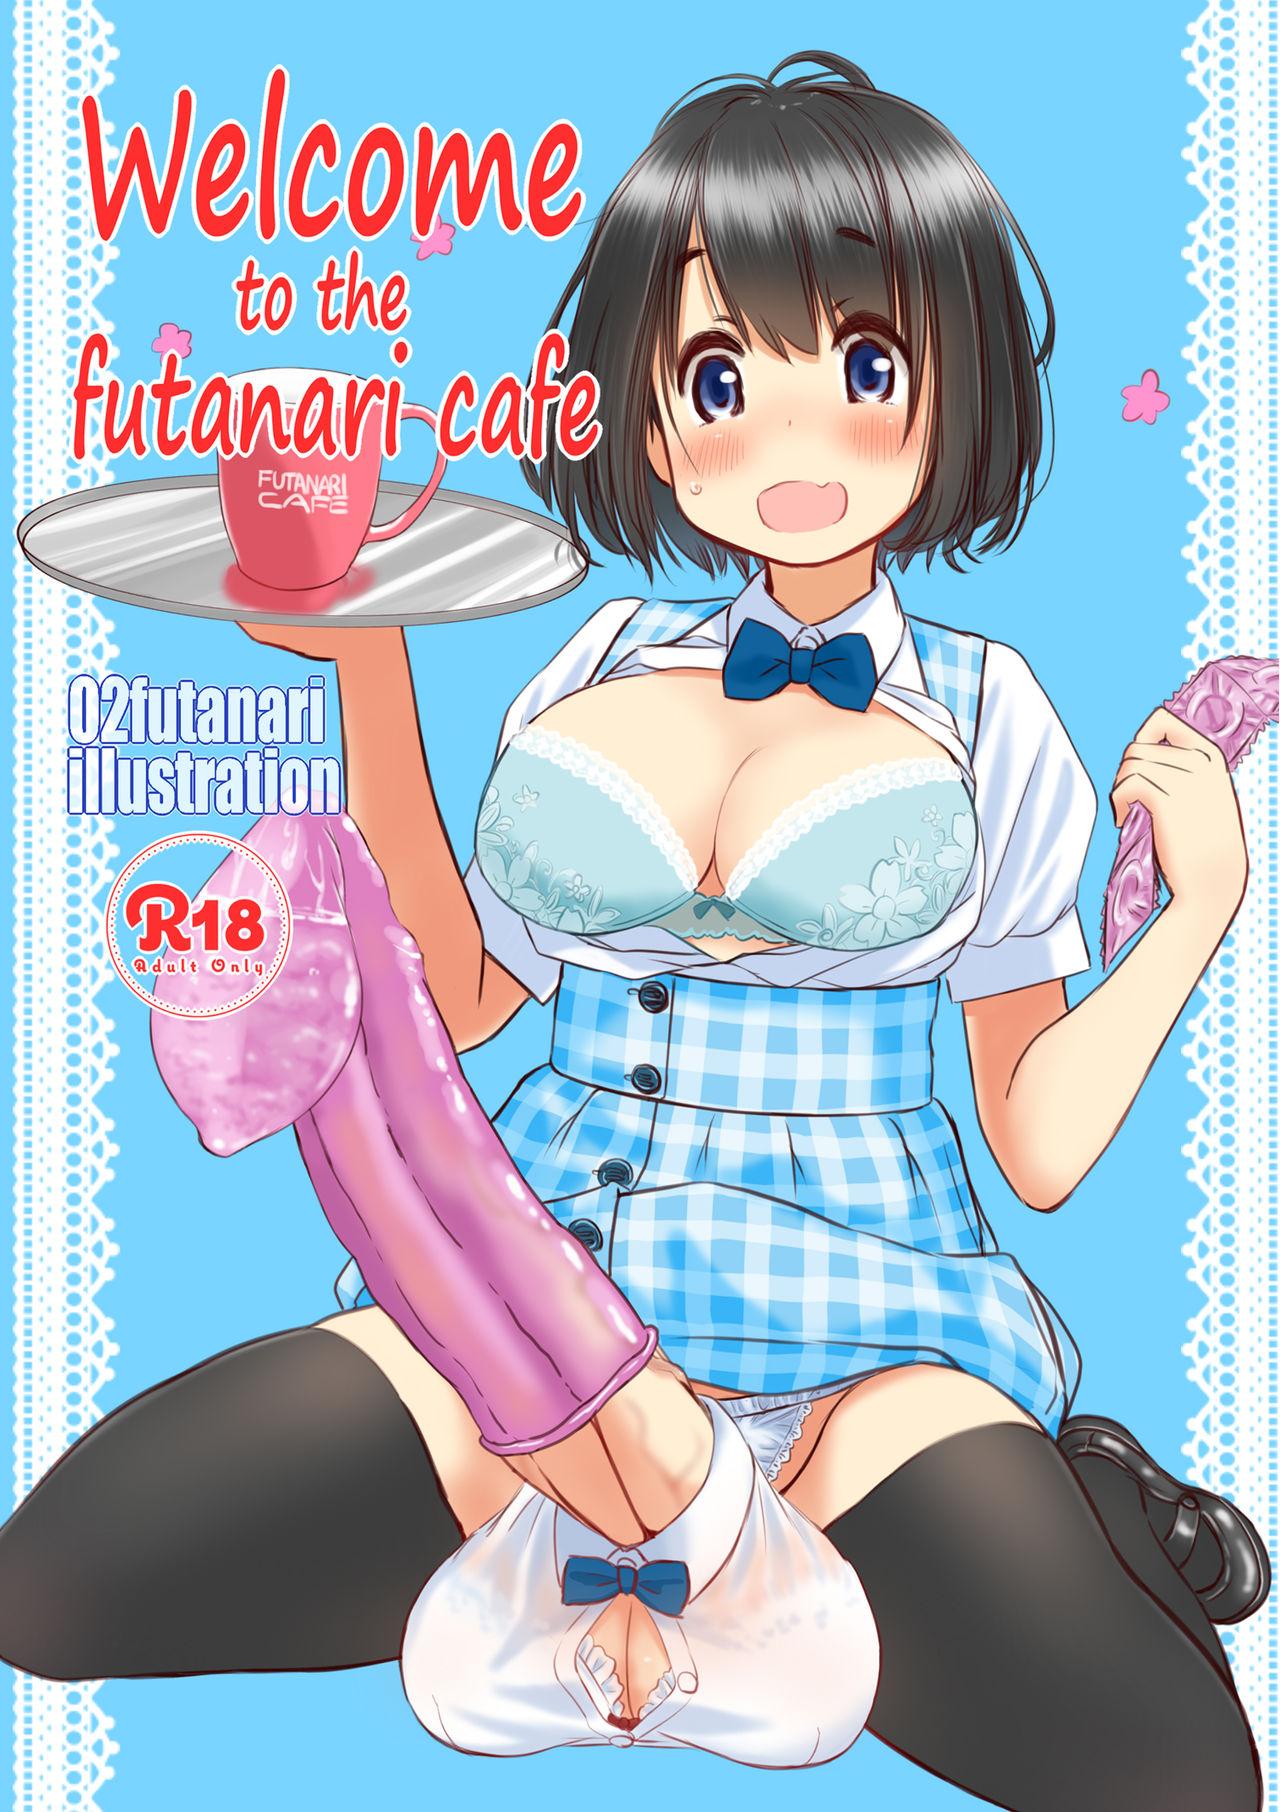 Chastity Welcome to the futanari cafe - Original Old Man - Picture 1